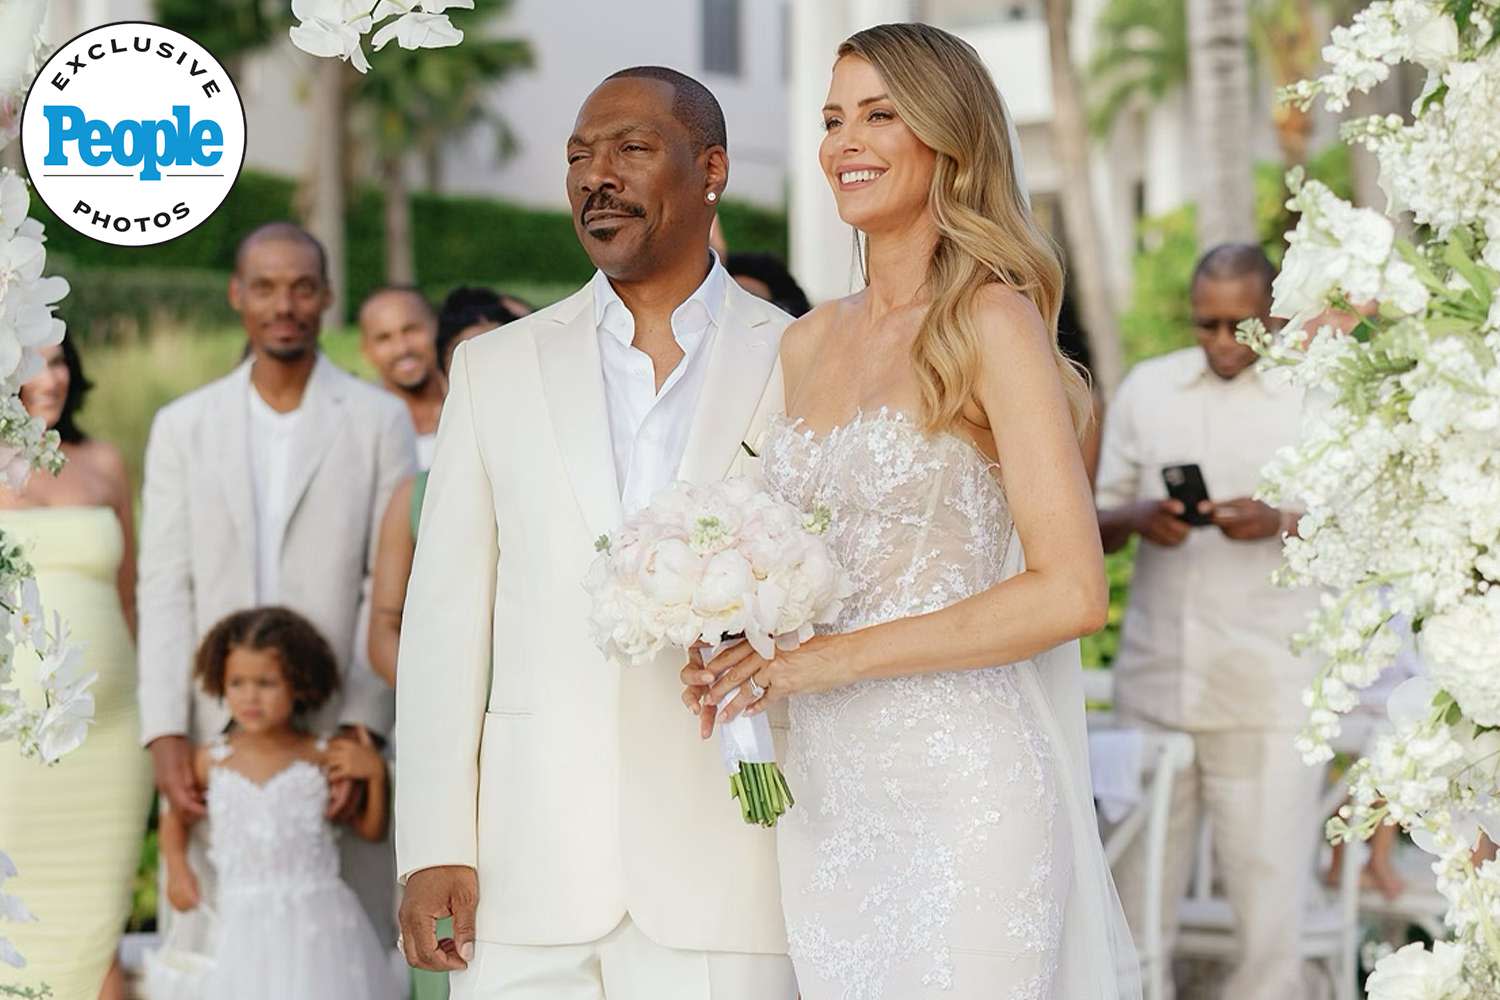 Eddie Murphy and Paige Butcher Are Married! Inside Their Private Caribbean Wedding (Exclusive)